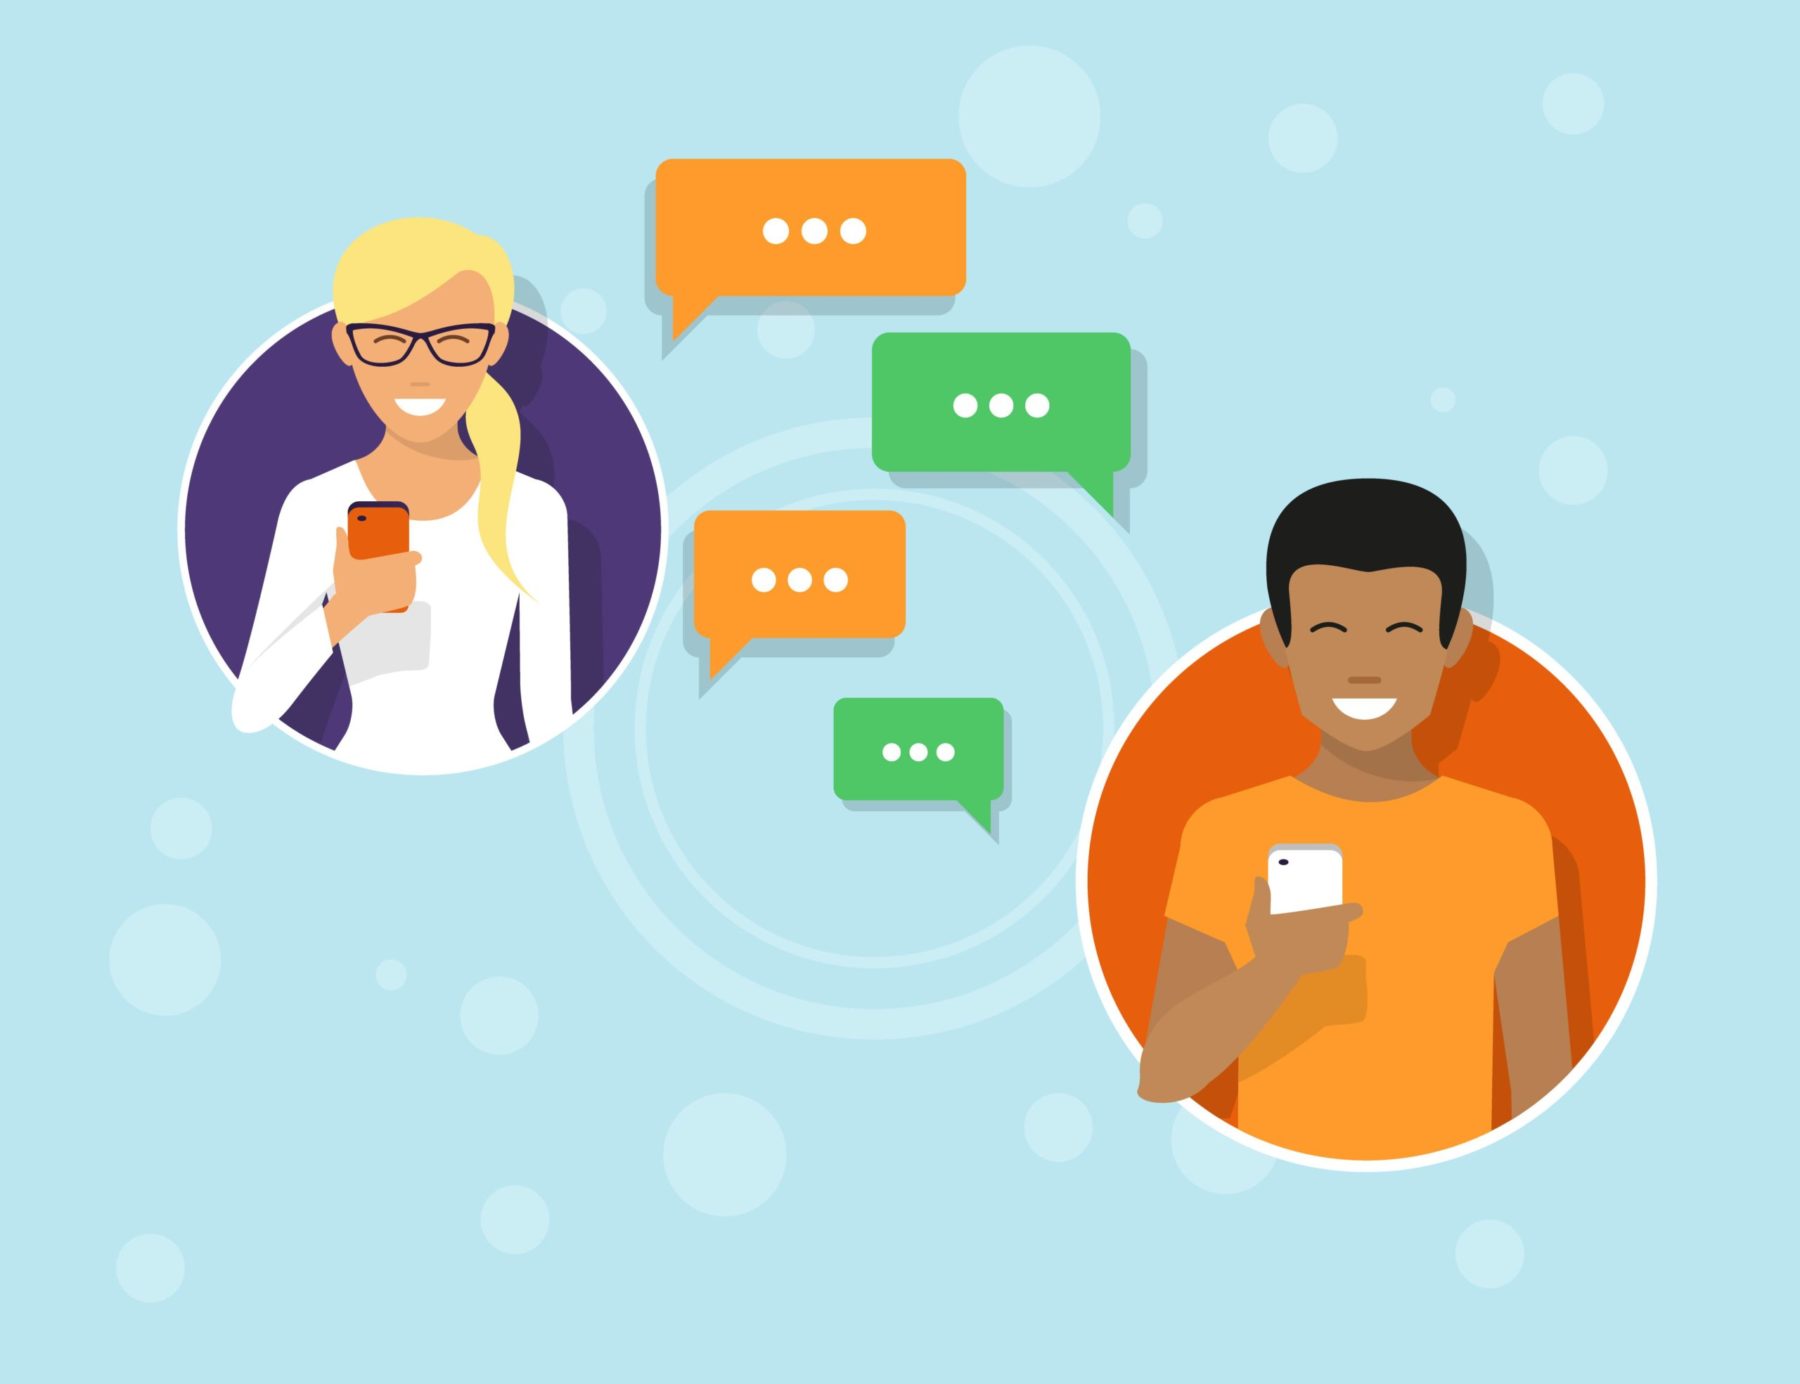 illustration showing two people chatting over instant messaging